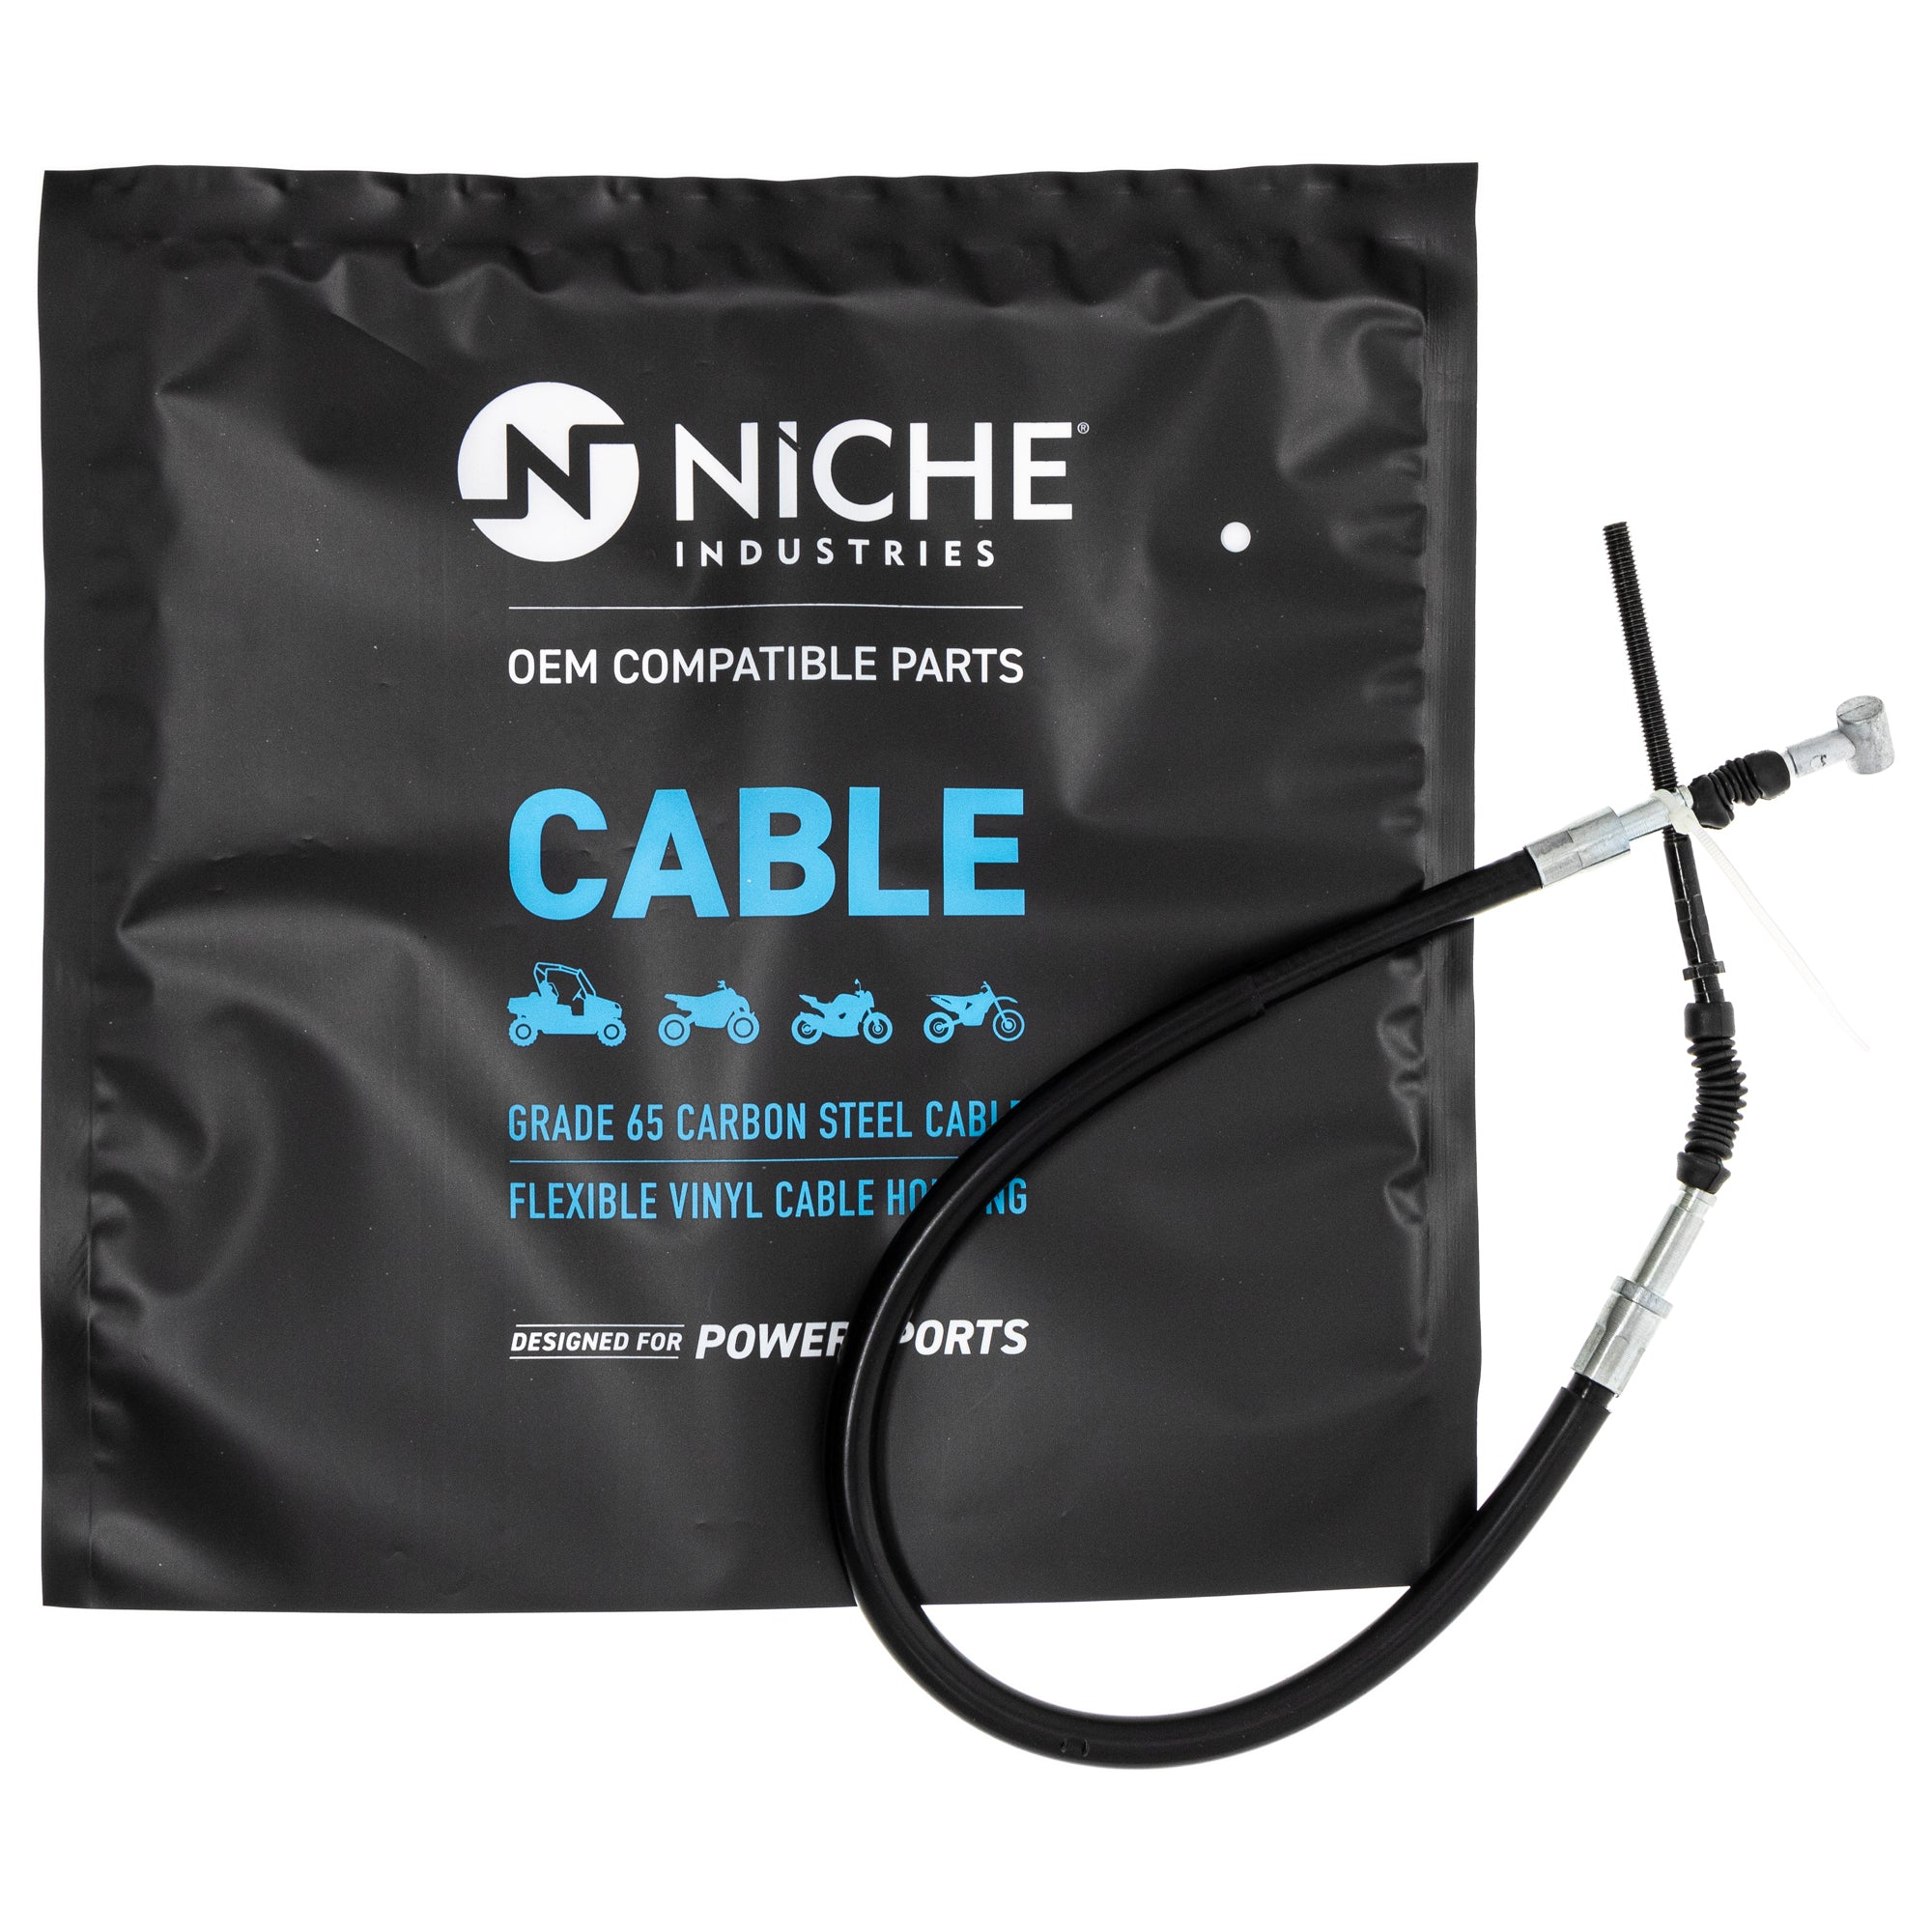 NICHE 519-CCB2294L Foot Brake Cable for zOTHER Big ATC250SX